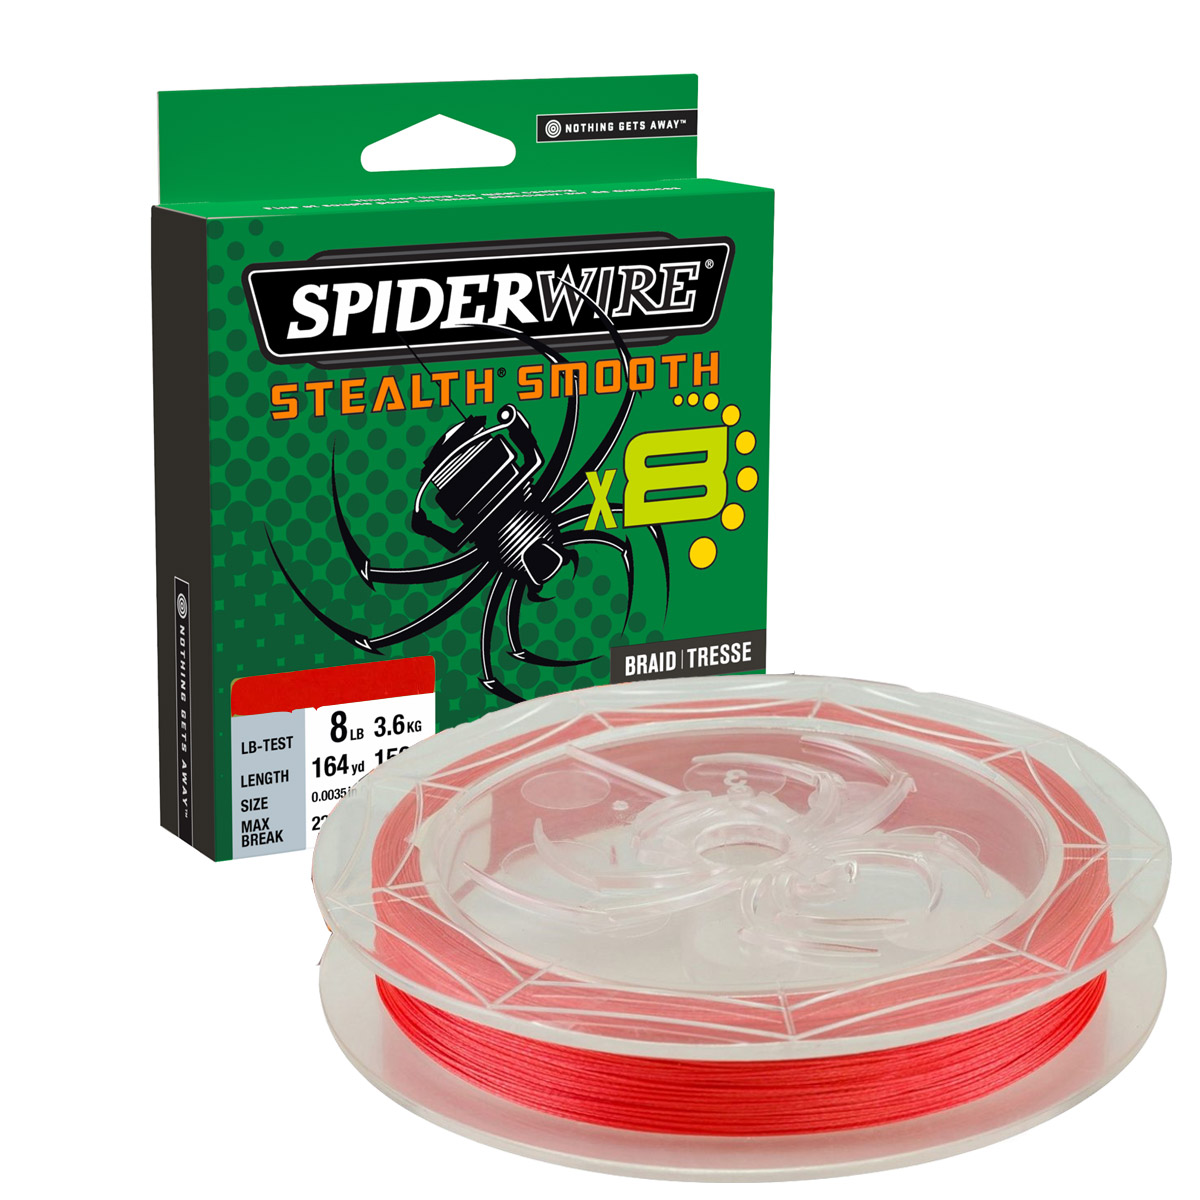 Spiderwire Stealth Smooth 8 Code Red 150 M -  0.15 mm -  0.07 mm -  0.11 mm -  0.13 mm -  0.06 mm -  0.19 mm -  0.09 mm -  0.23 mm -  0.29 mm -  0.33 mm -  0.39 mm